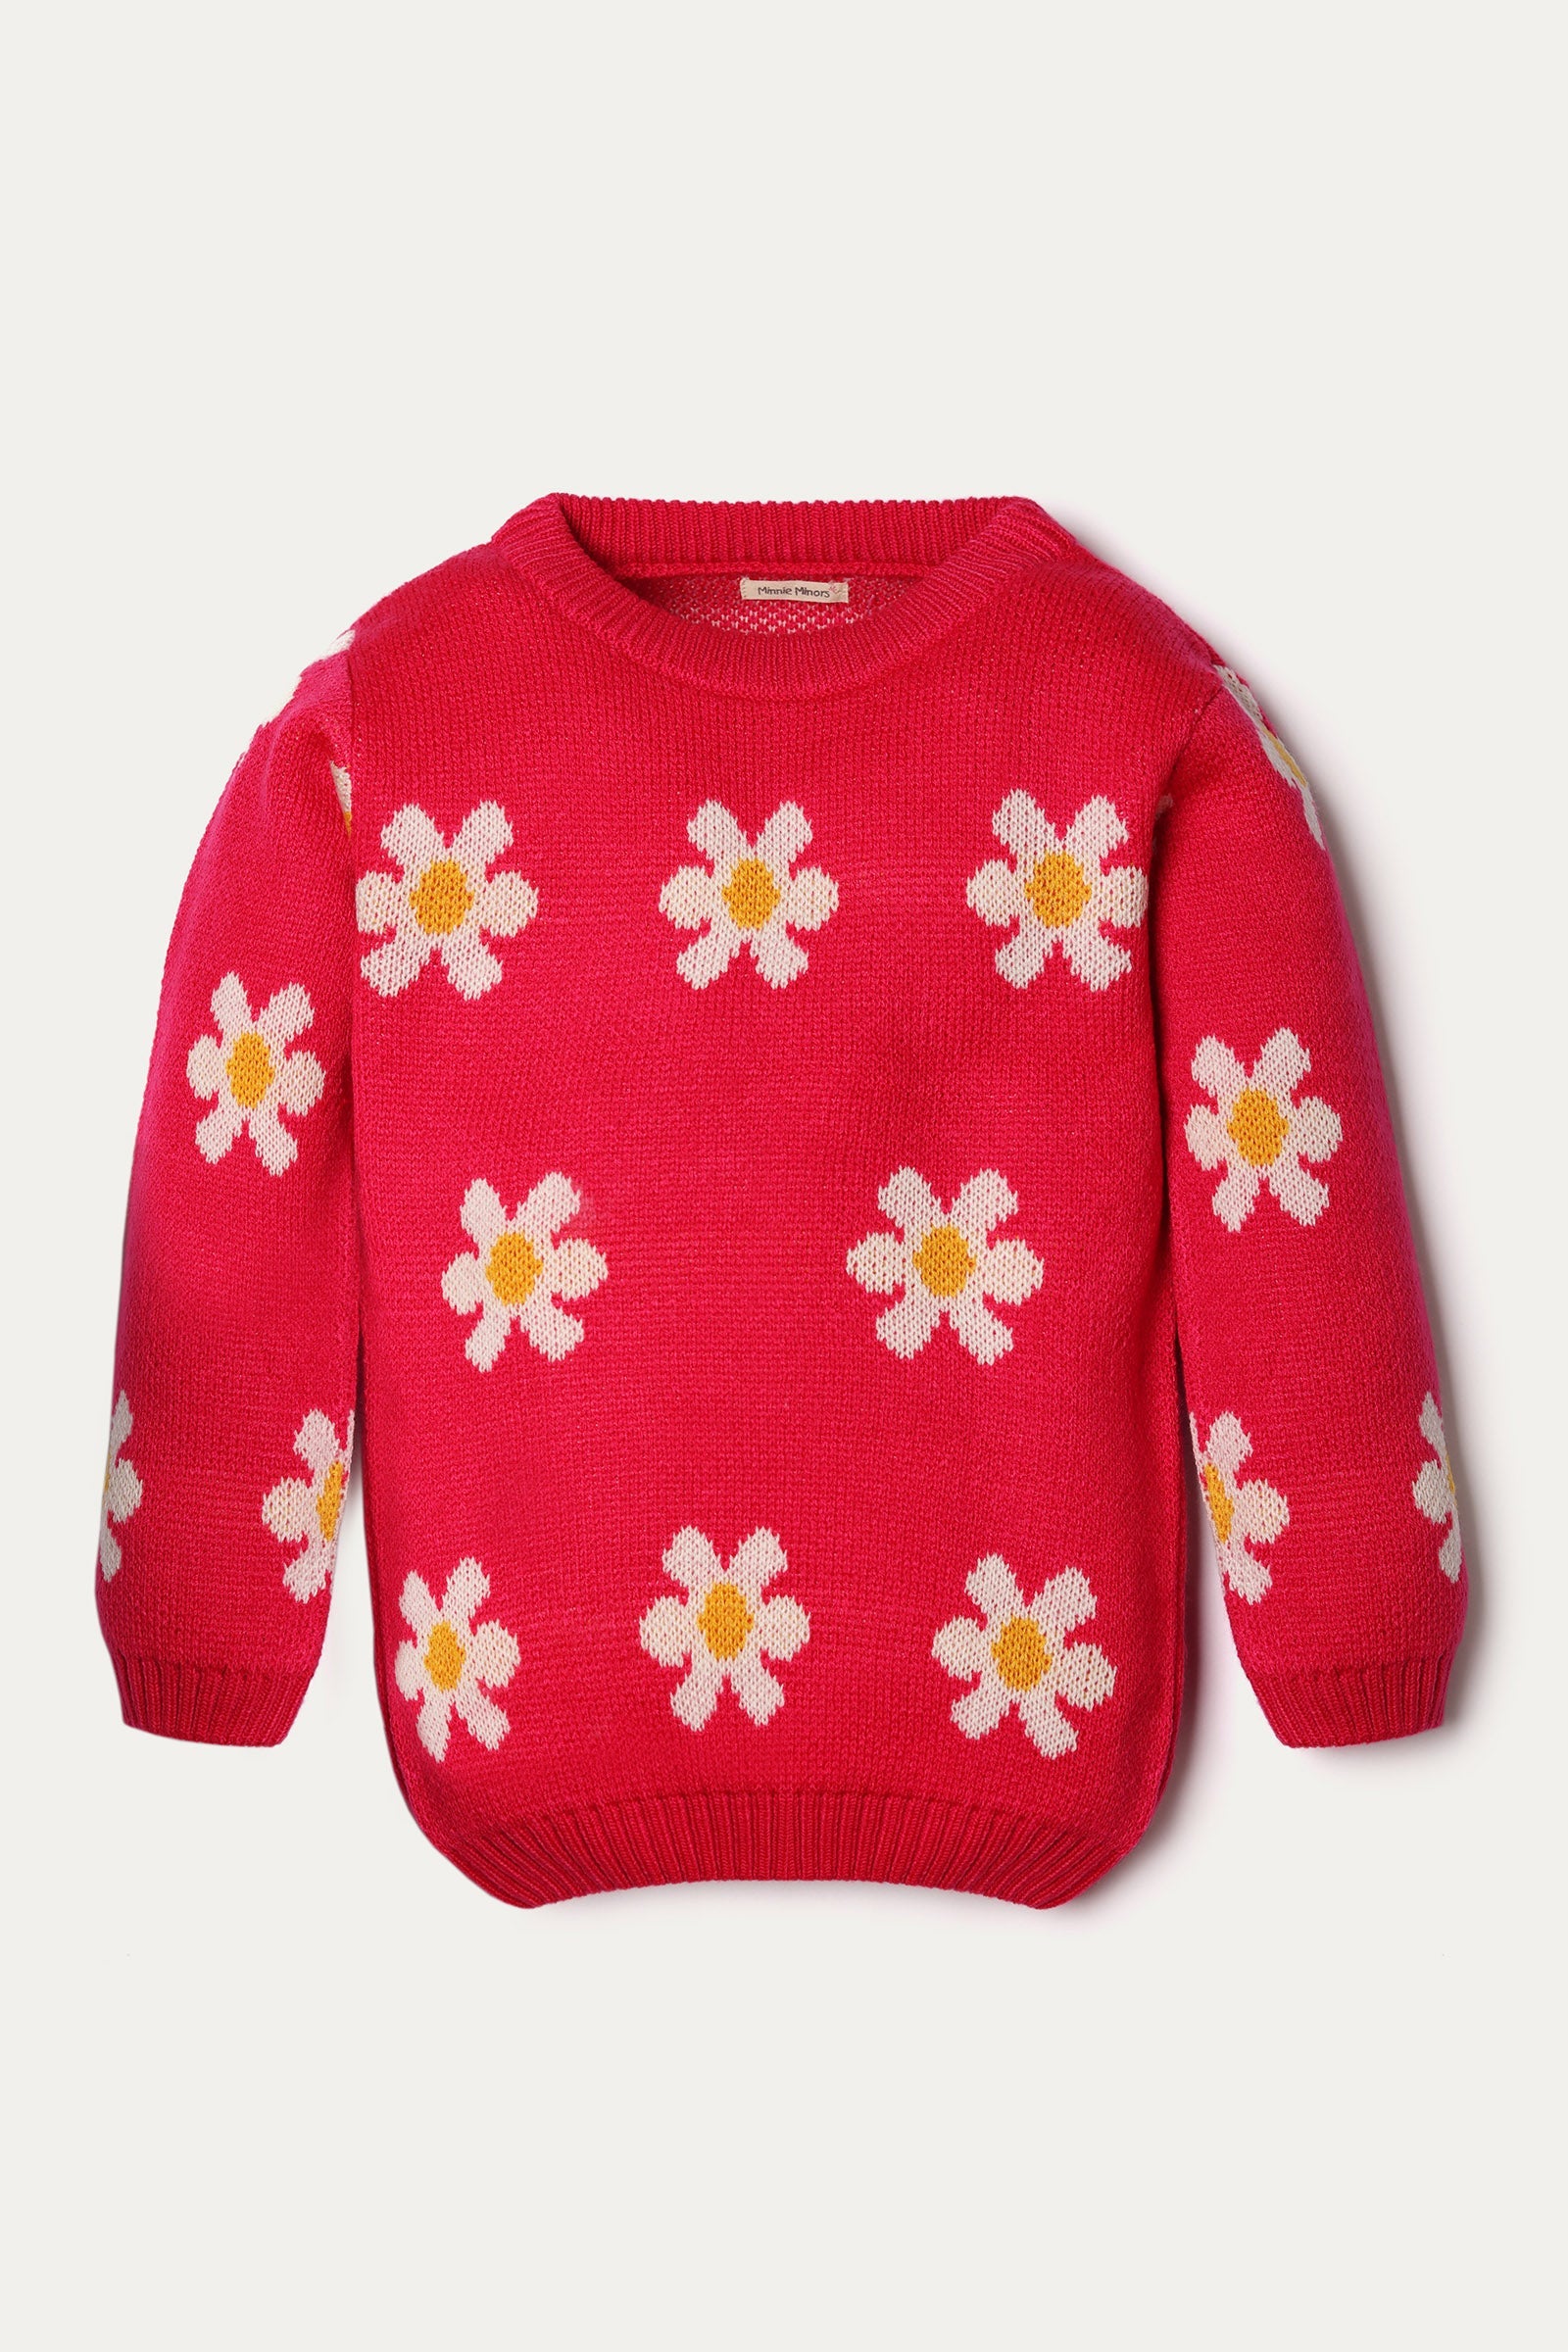 Fashion-Forward Girls Daisy Jacquard Sweater - Available Online Now!